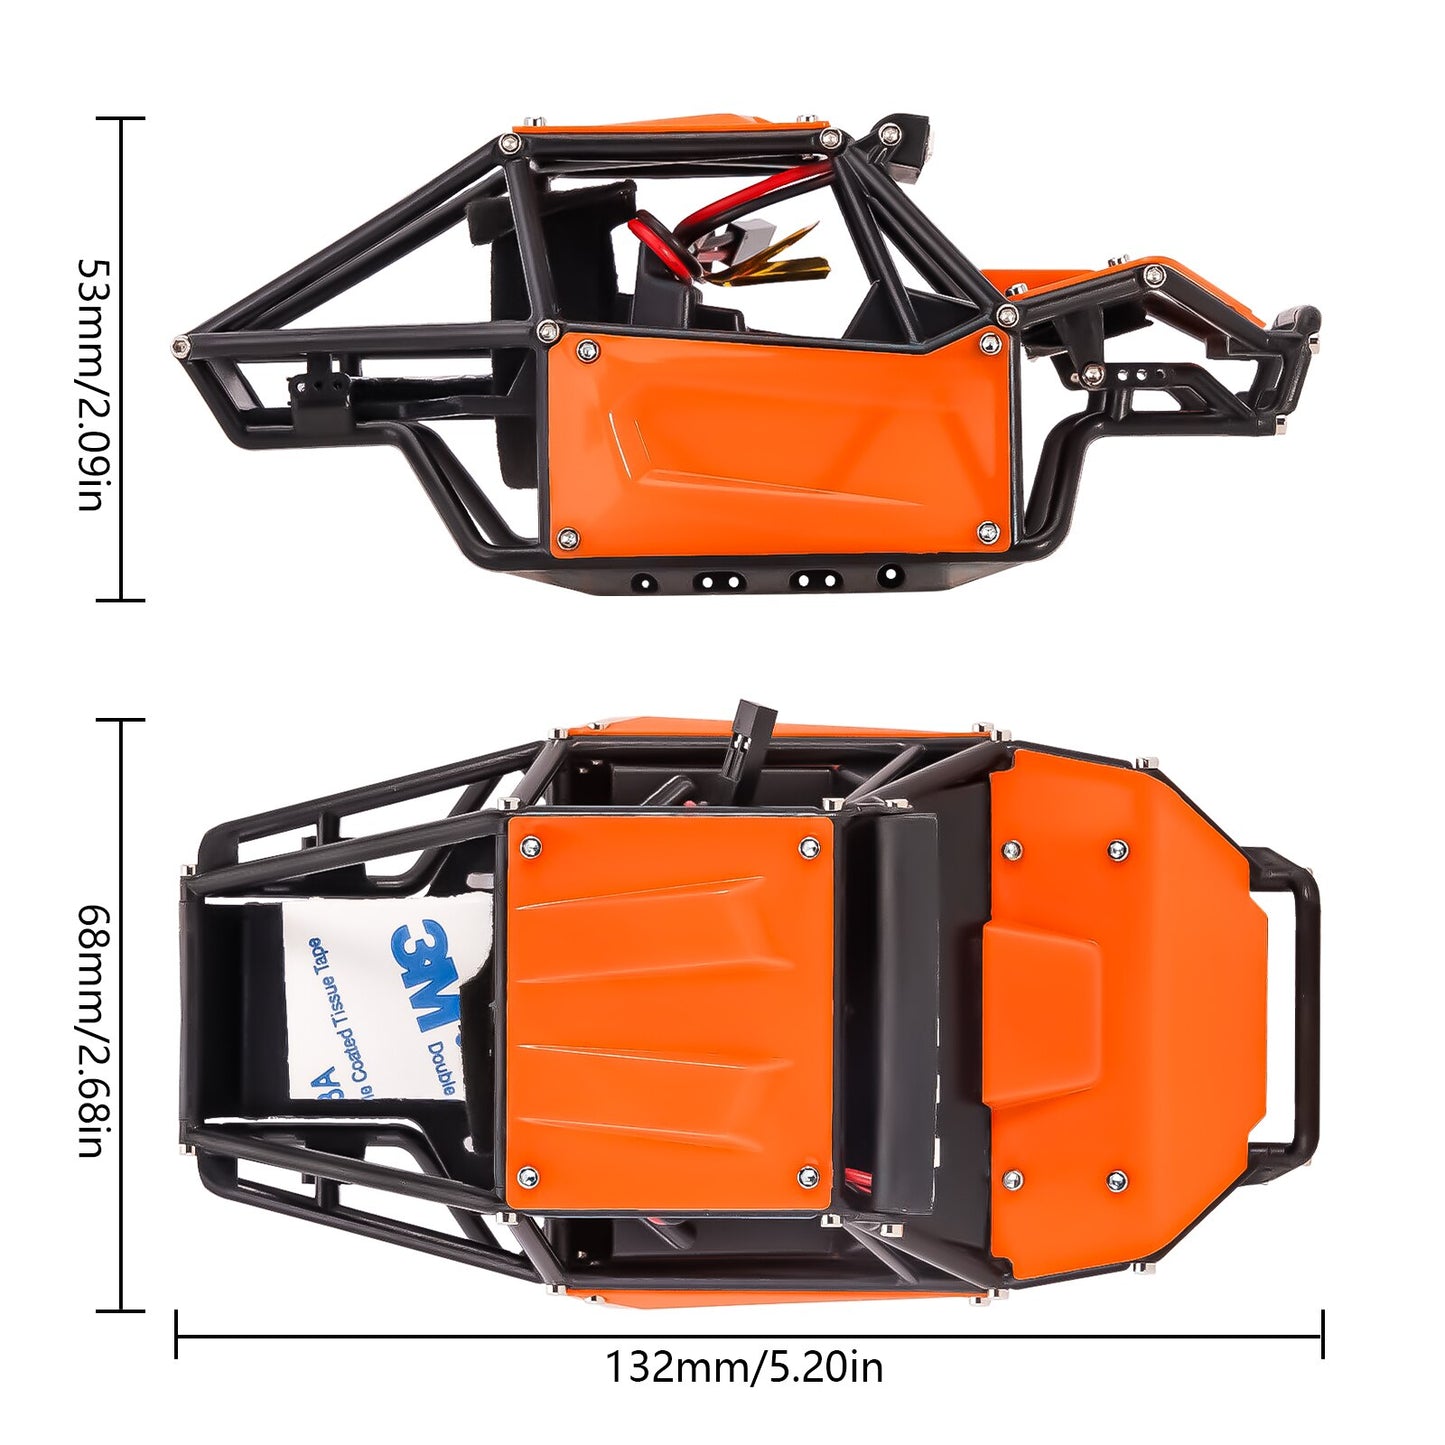 INJORA Nylon Rock Buggy Body Shell Chassis Kit for 1/24 RC Crawler Car Axial SCX24 C10 JEEP JLU Bronco Upgrade Parts